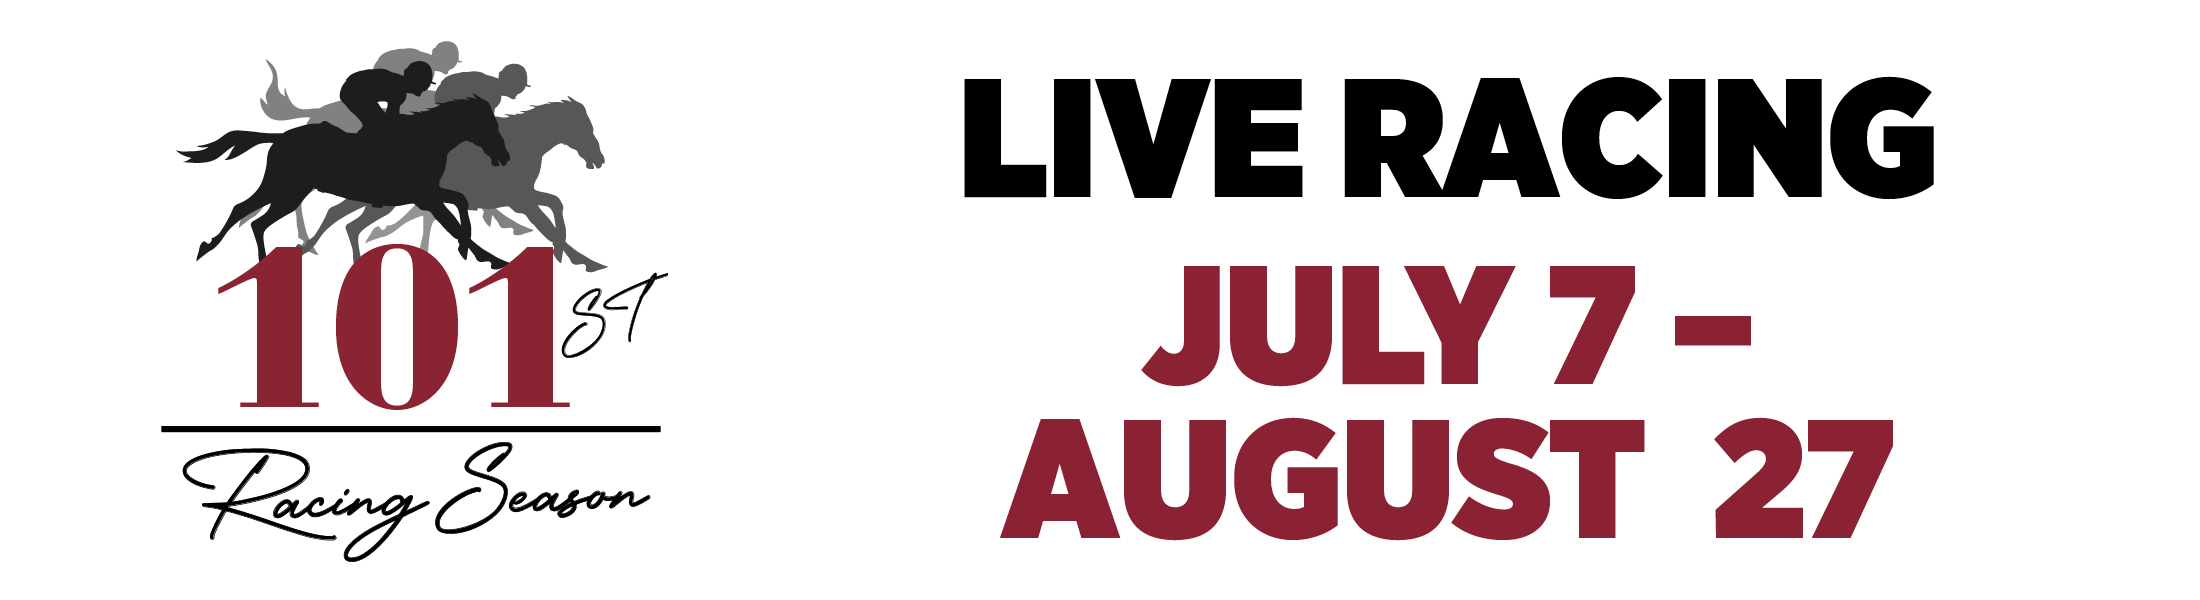 Live Racing | July 7 - August 27